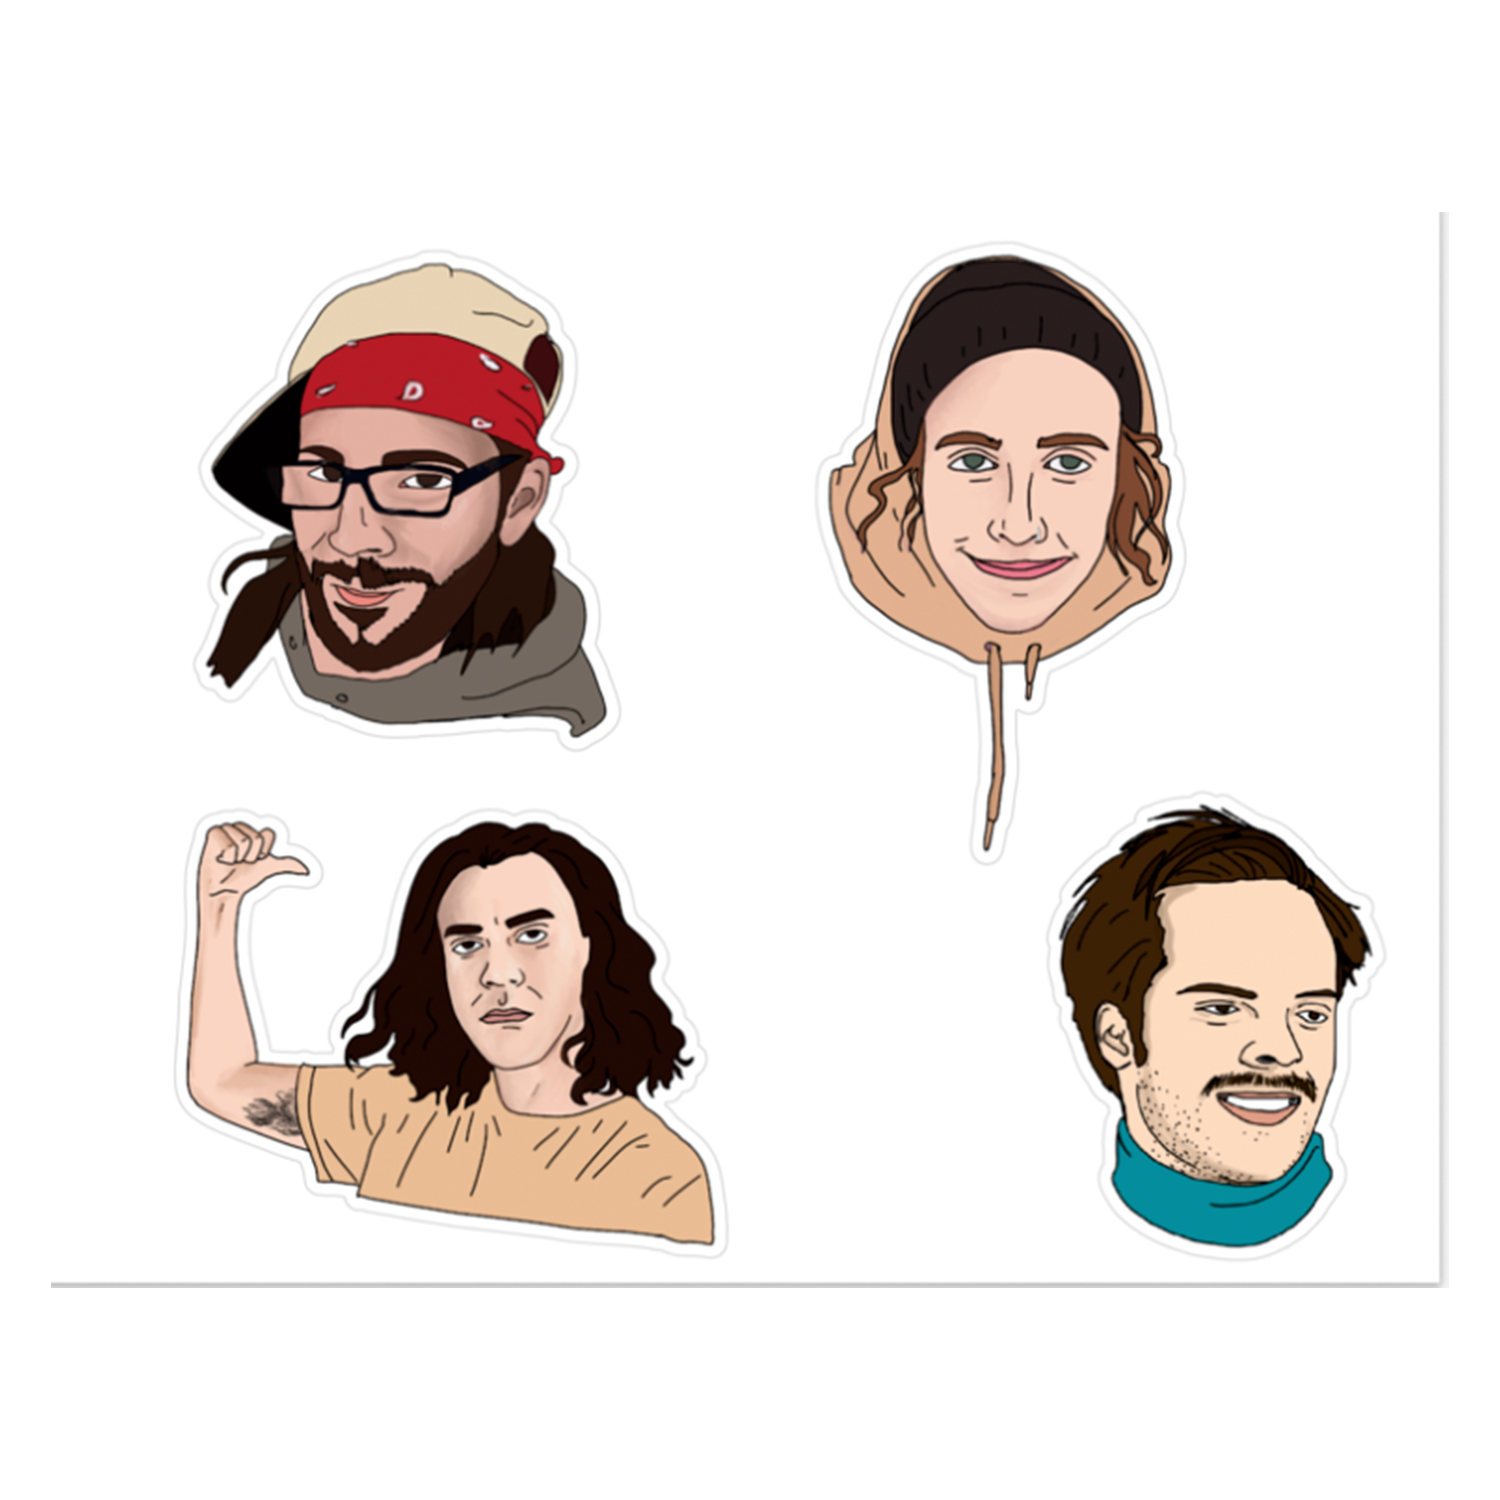 4 stickers with each Peach Pit band member